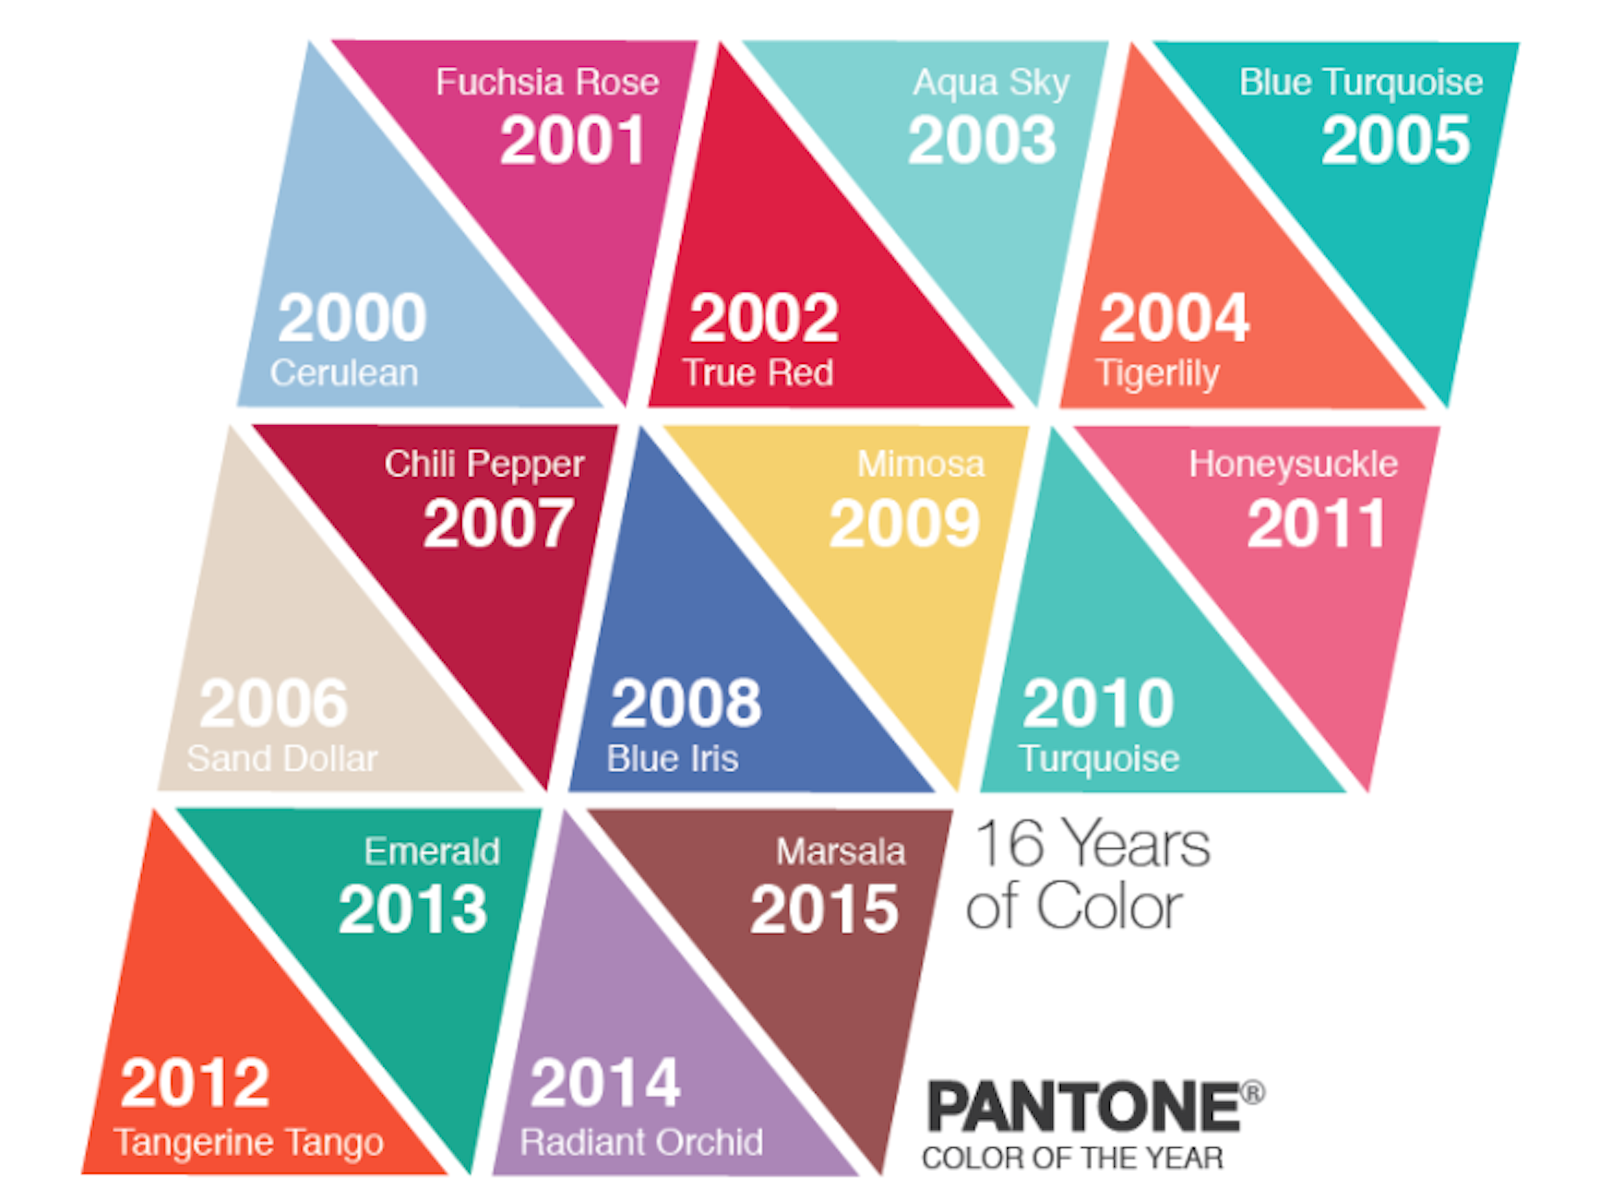 Pantone colors of the year